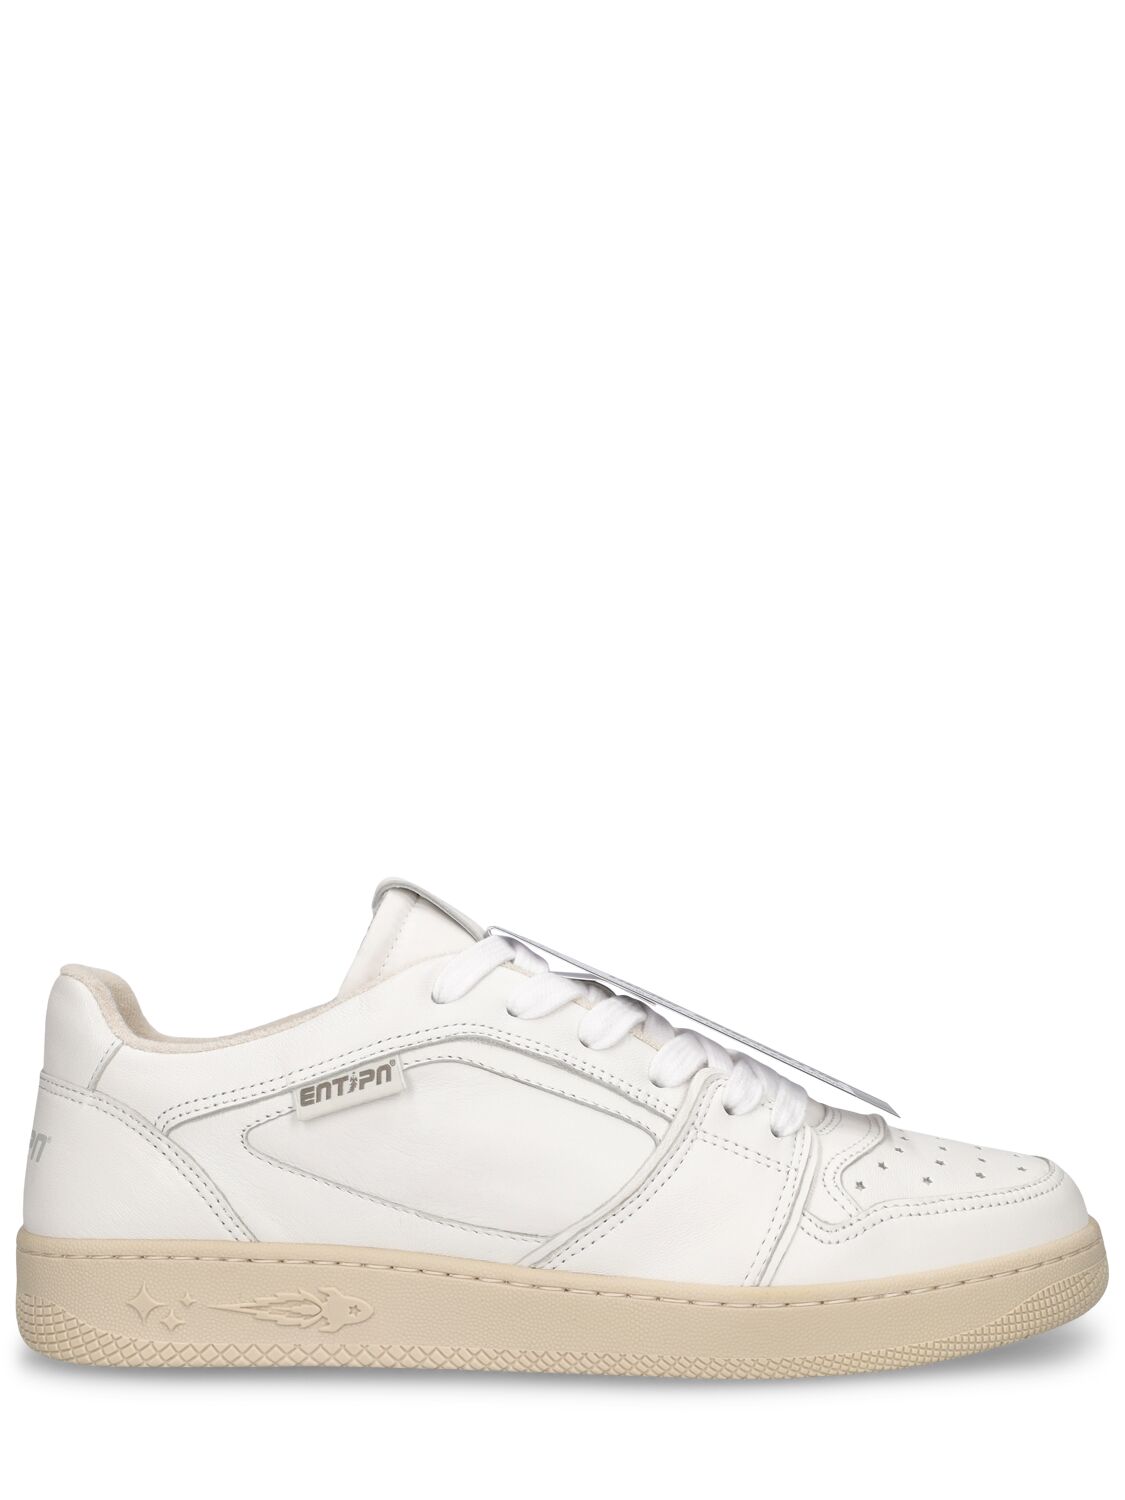 Enterprise Japan Ej Egg Tag Low Leather Trainers In White